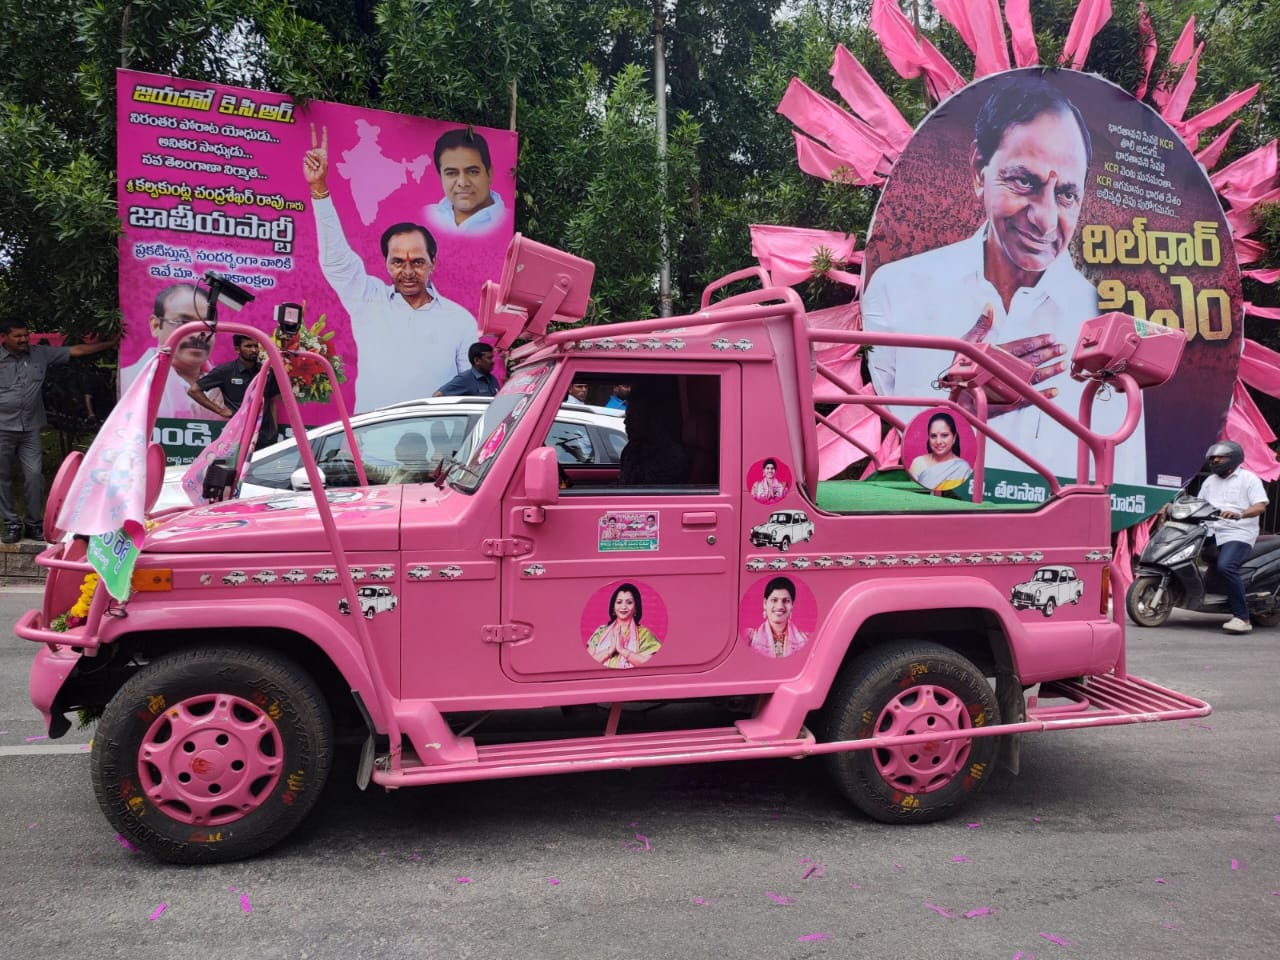 The enthusiasm was high on the occasion of TRS expanding its activities nationwide and rebranding itself as Bharat Rashtra Samiti (BRS). (Ajay Tomar/South First)